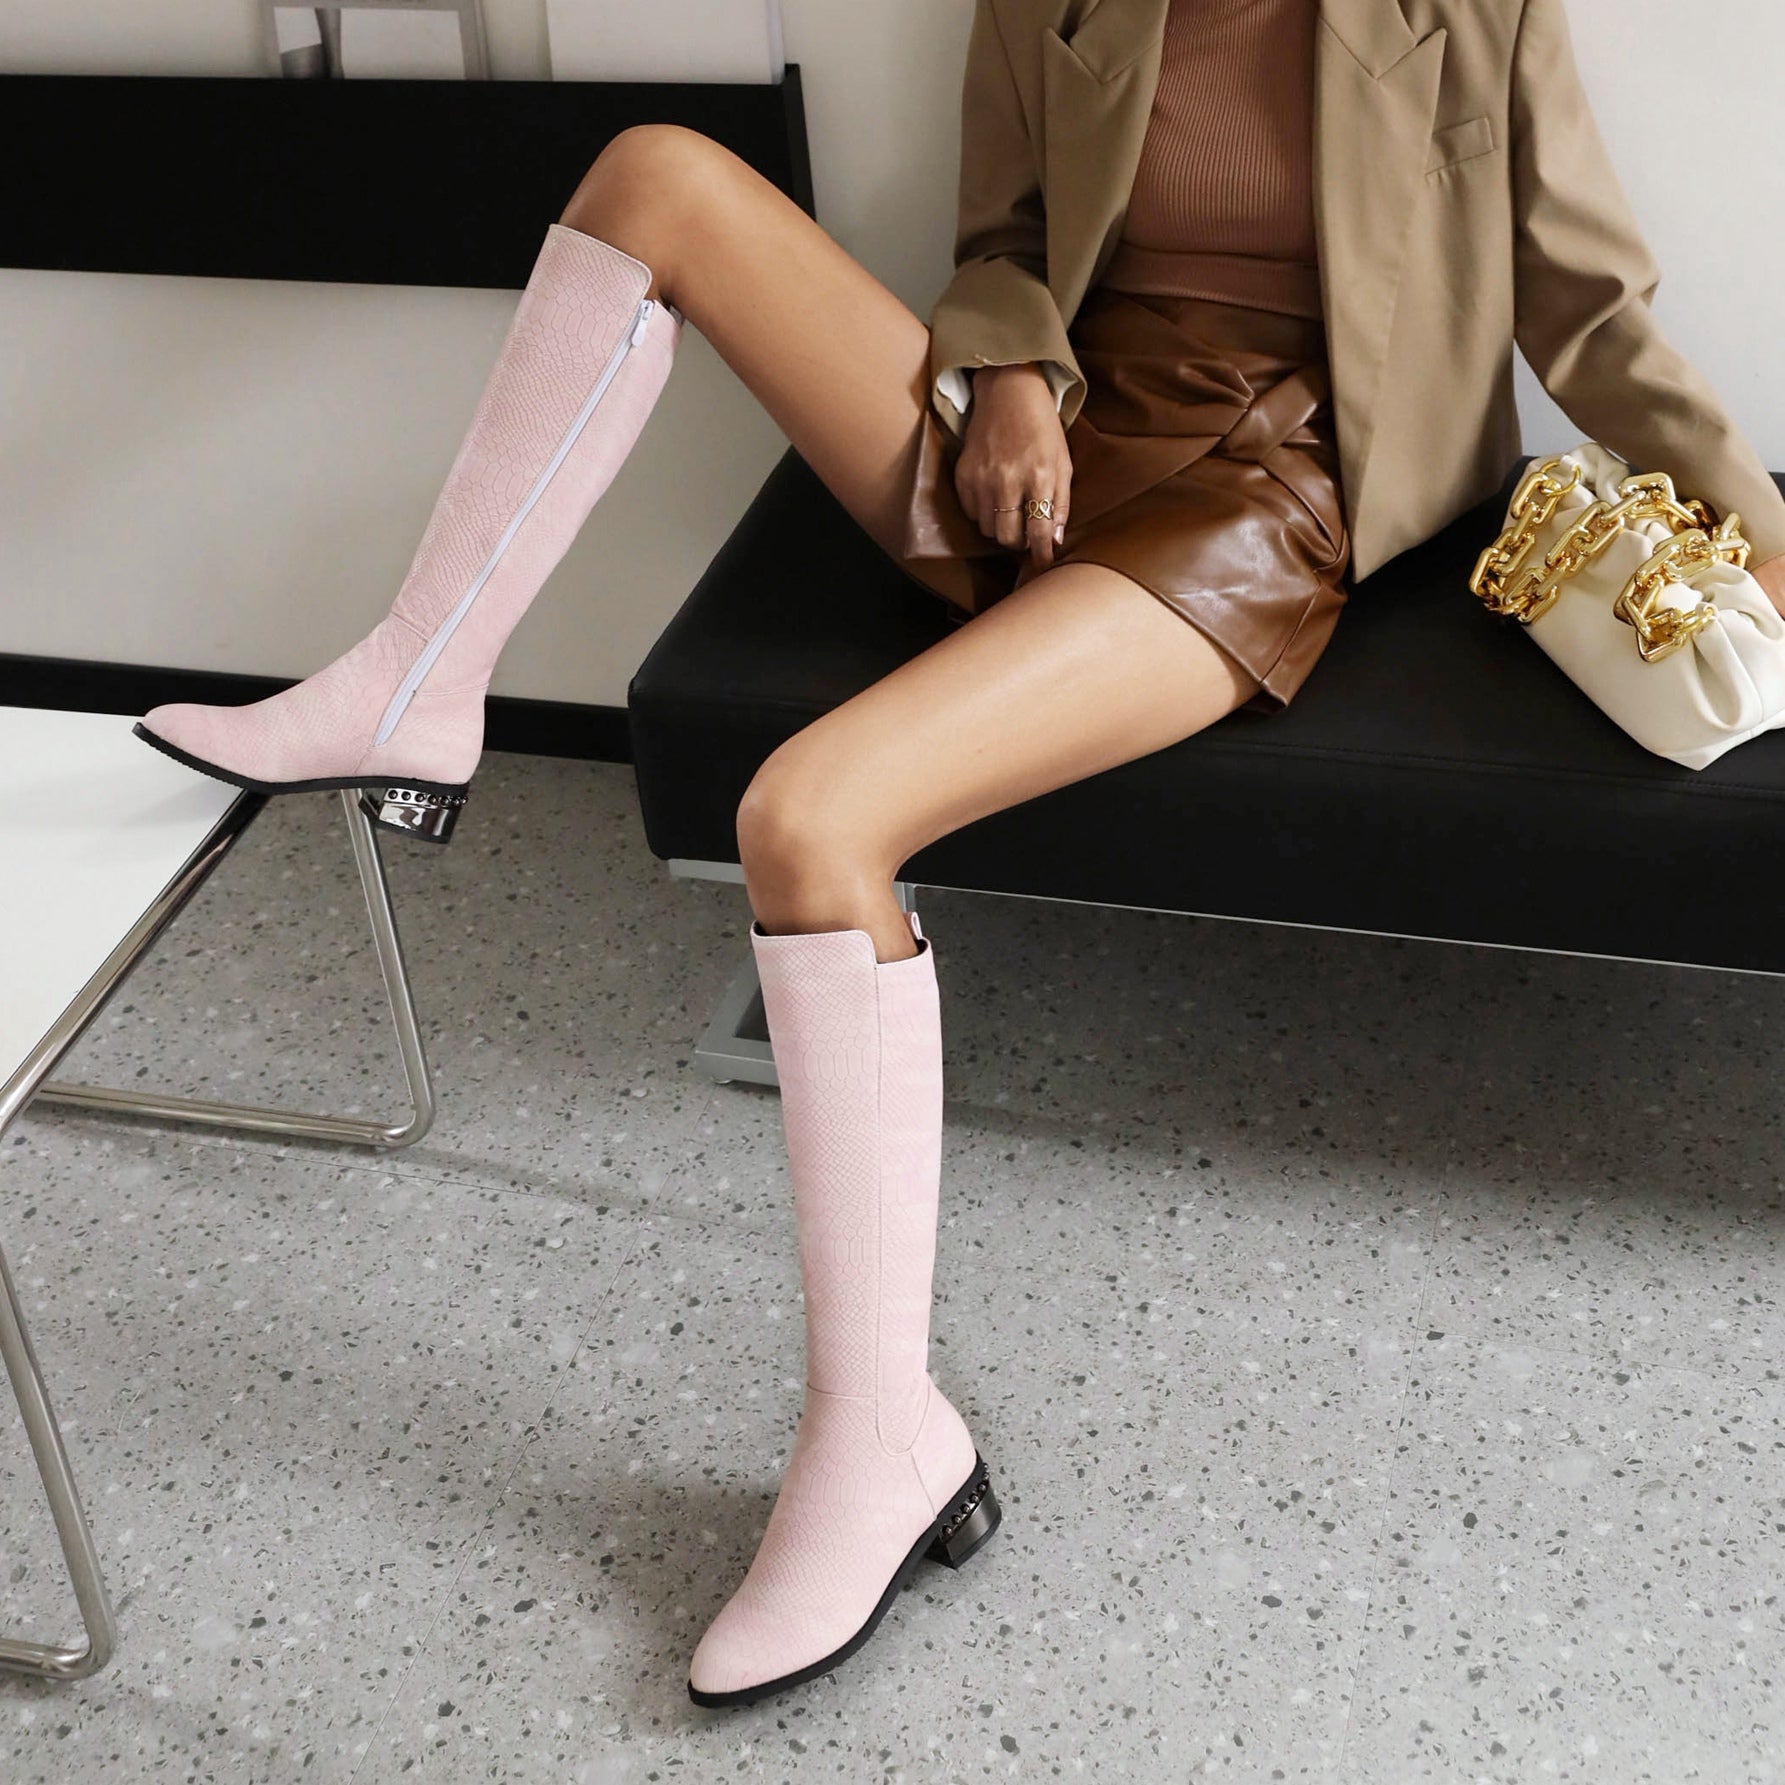 Bigsizeheels Simple solid color round toe over-the-knee boots-Pink freeshipping - bigsizeheel®-size5-size15 -All Plus Sizes Available!